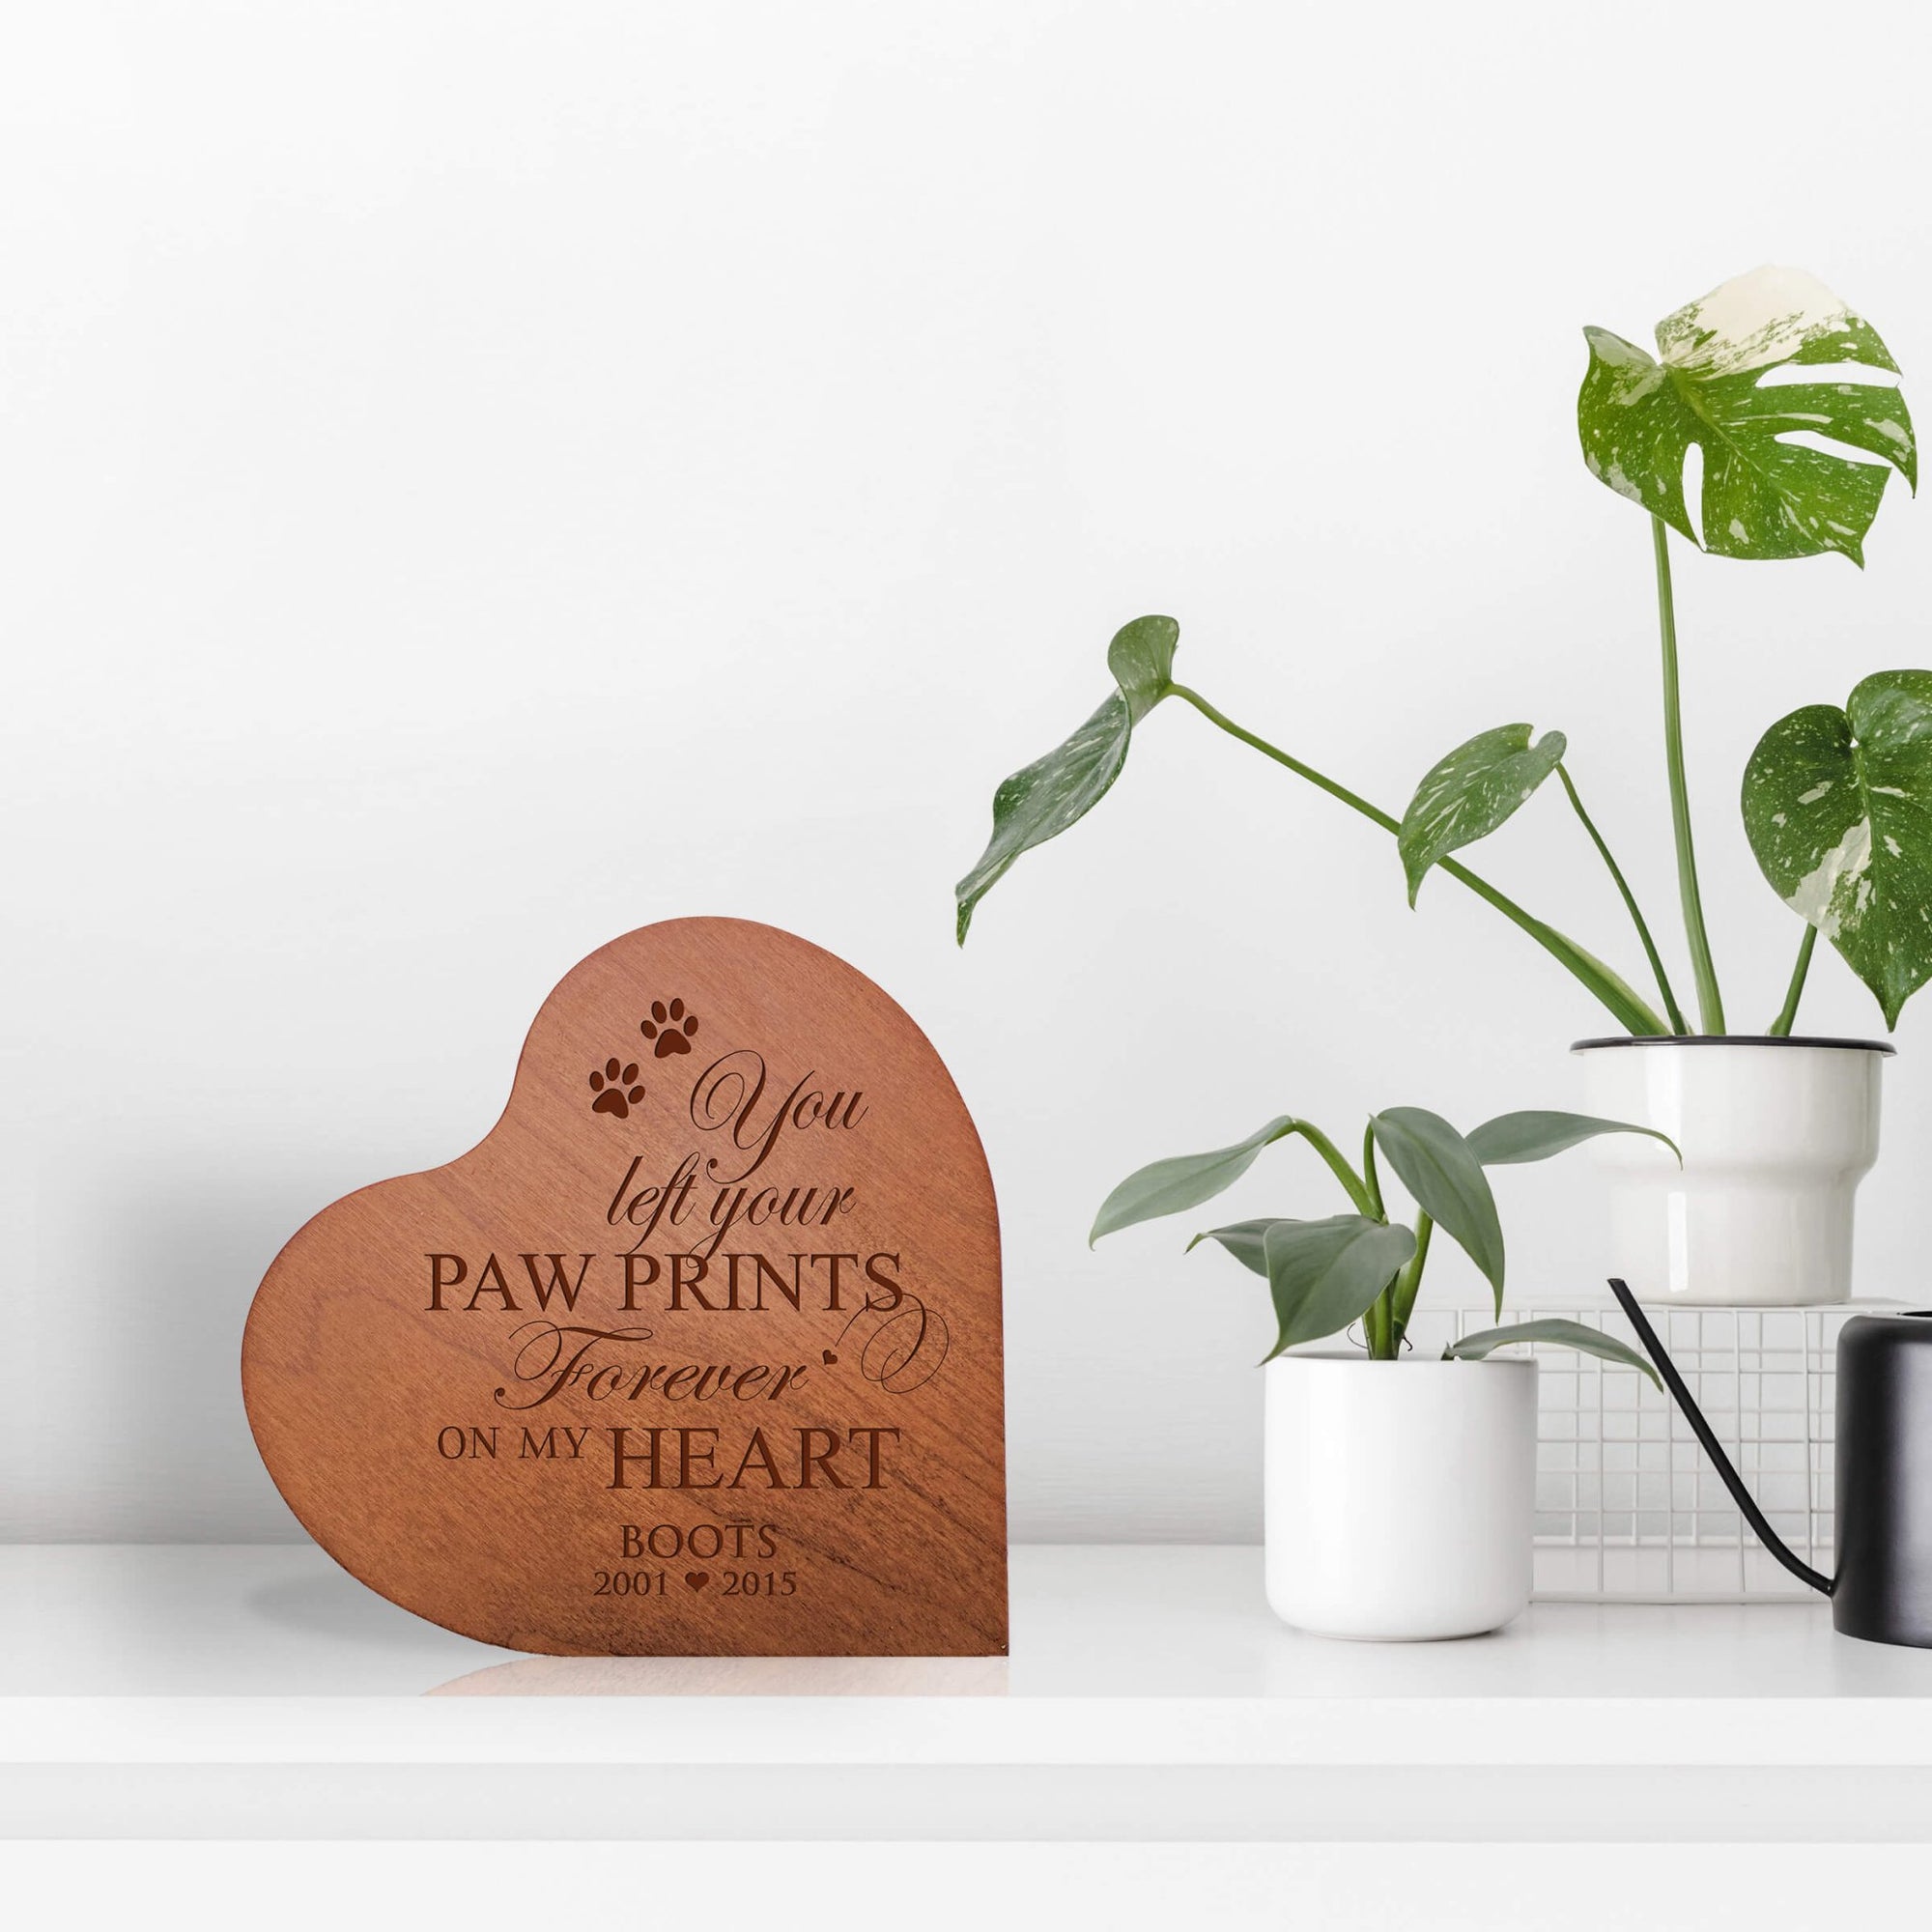 Personalized Small Heart Cremation Urn Keepsake For Pet Ashes - You Left Your Paw Prints - LifeSong Milestones